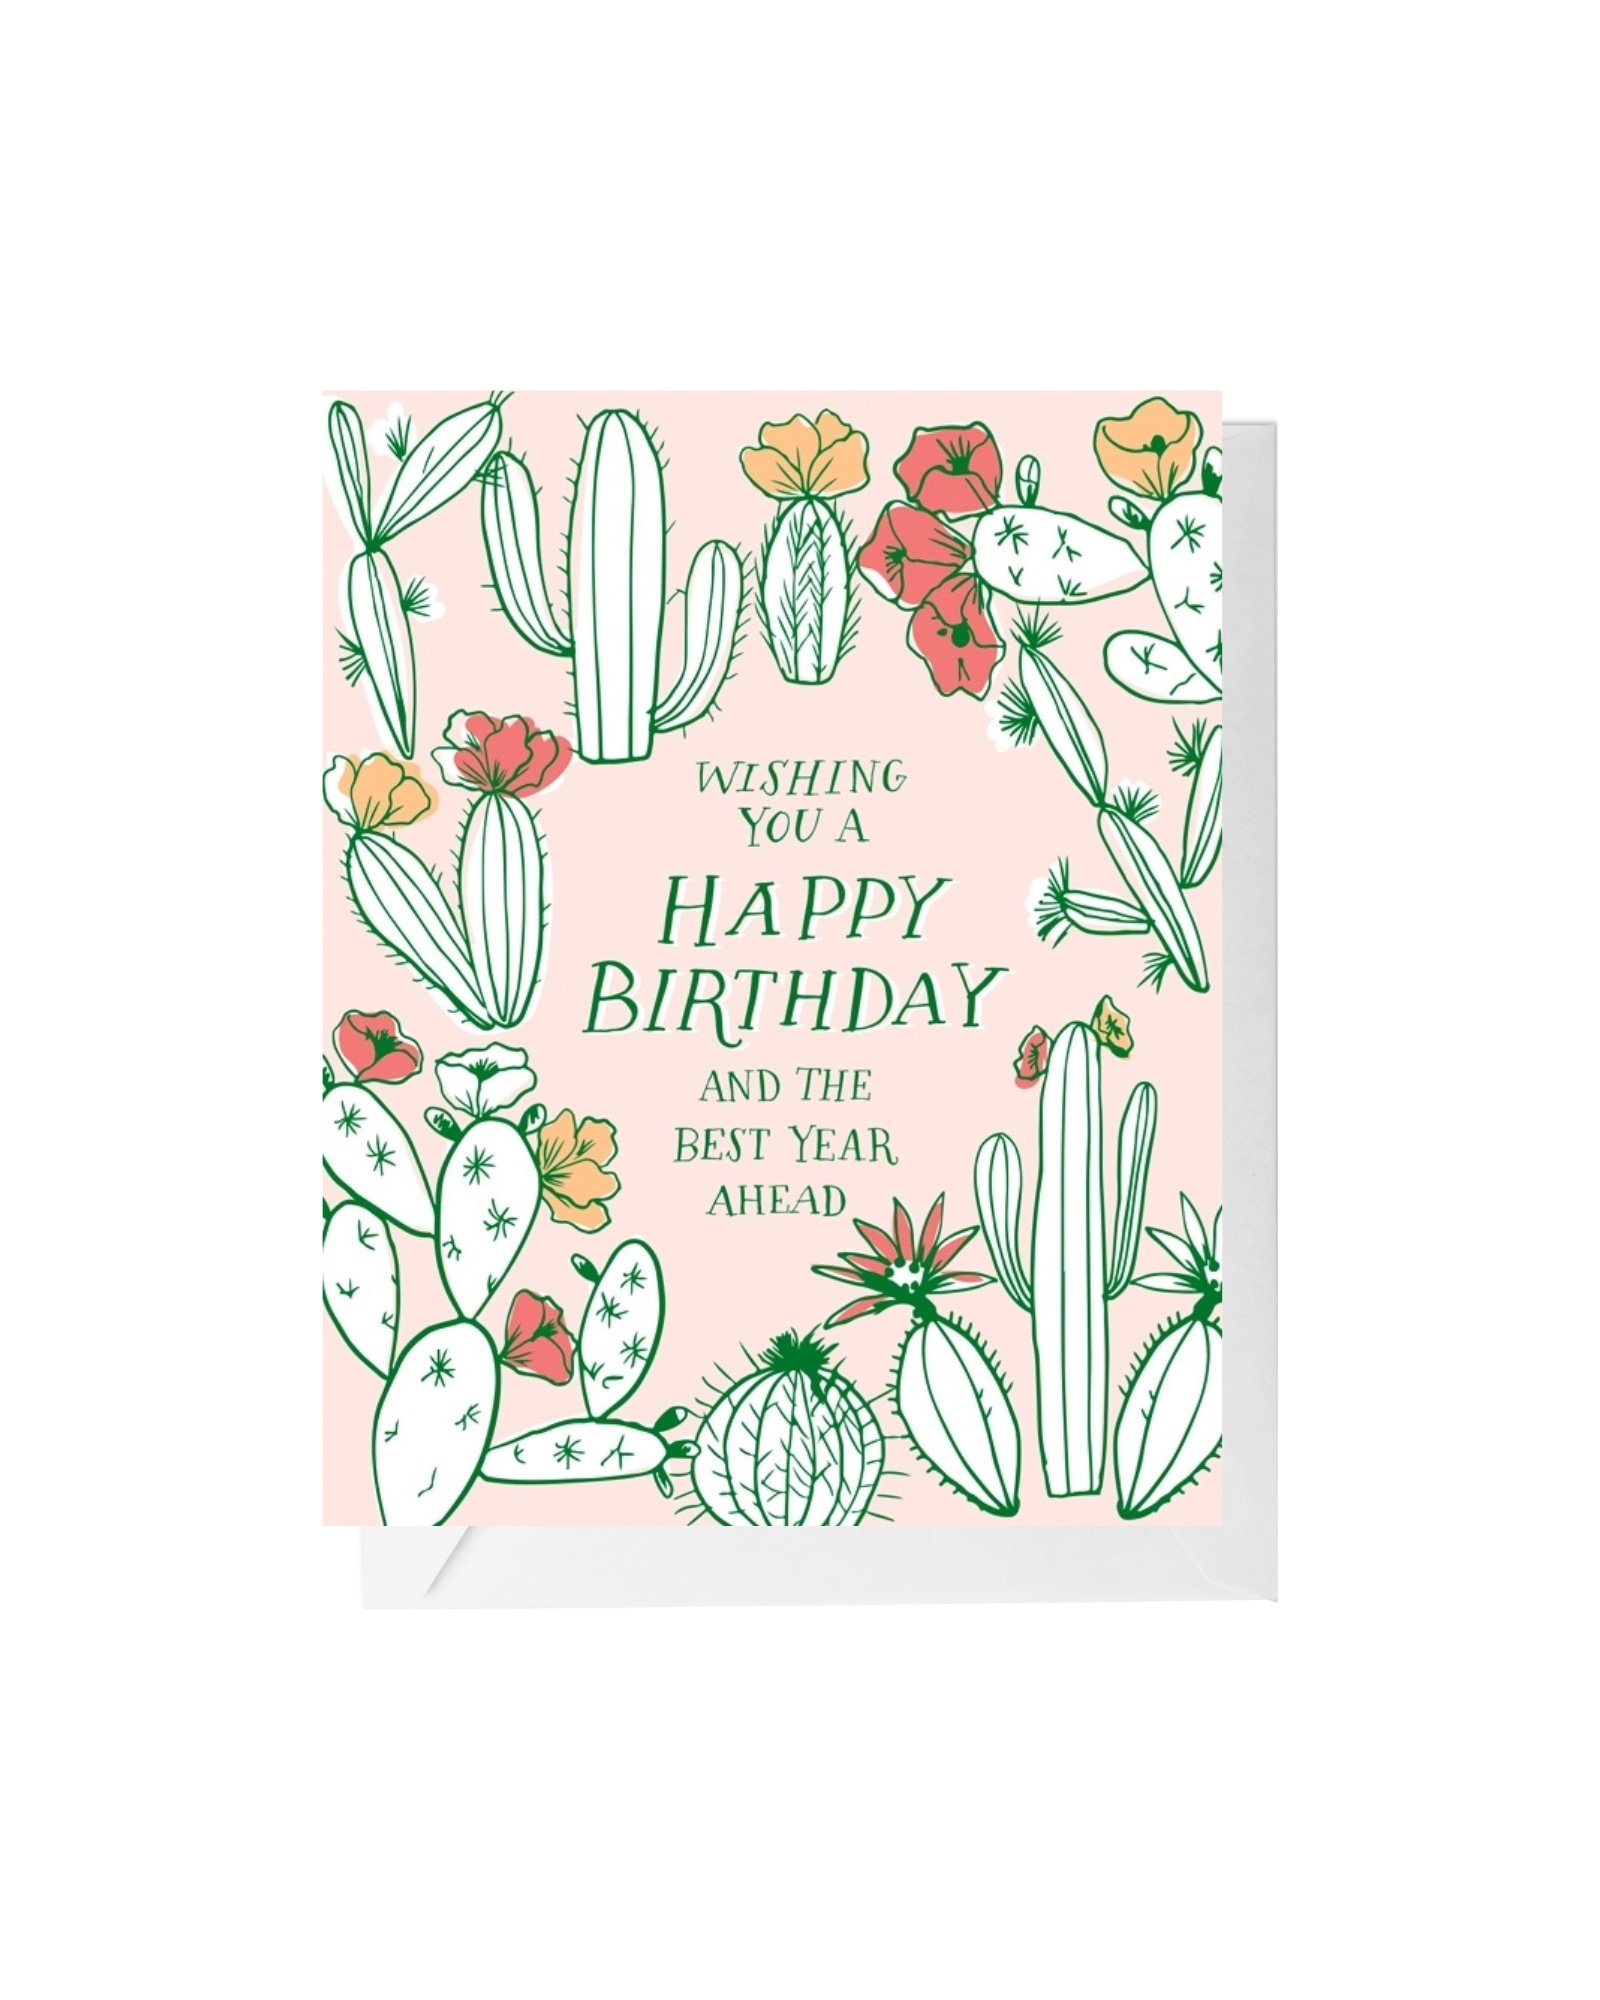 Light pink card with blooming cactus line drawings surrounding text that reads "wishing you a happy birthday and the best year ahead"